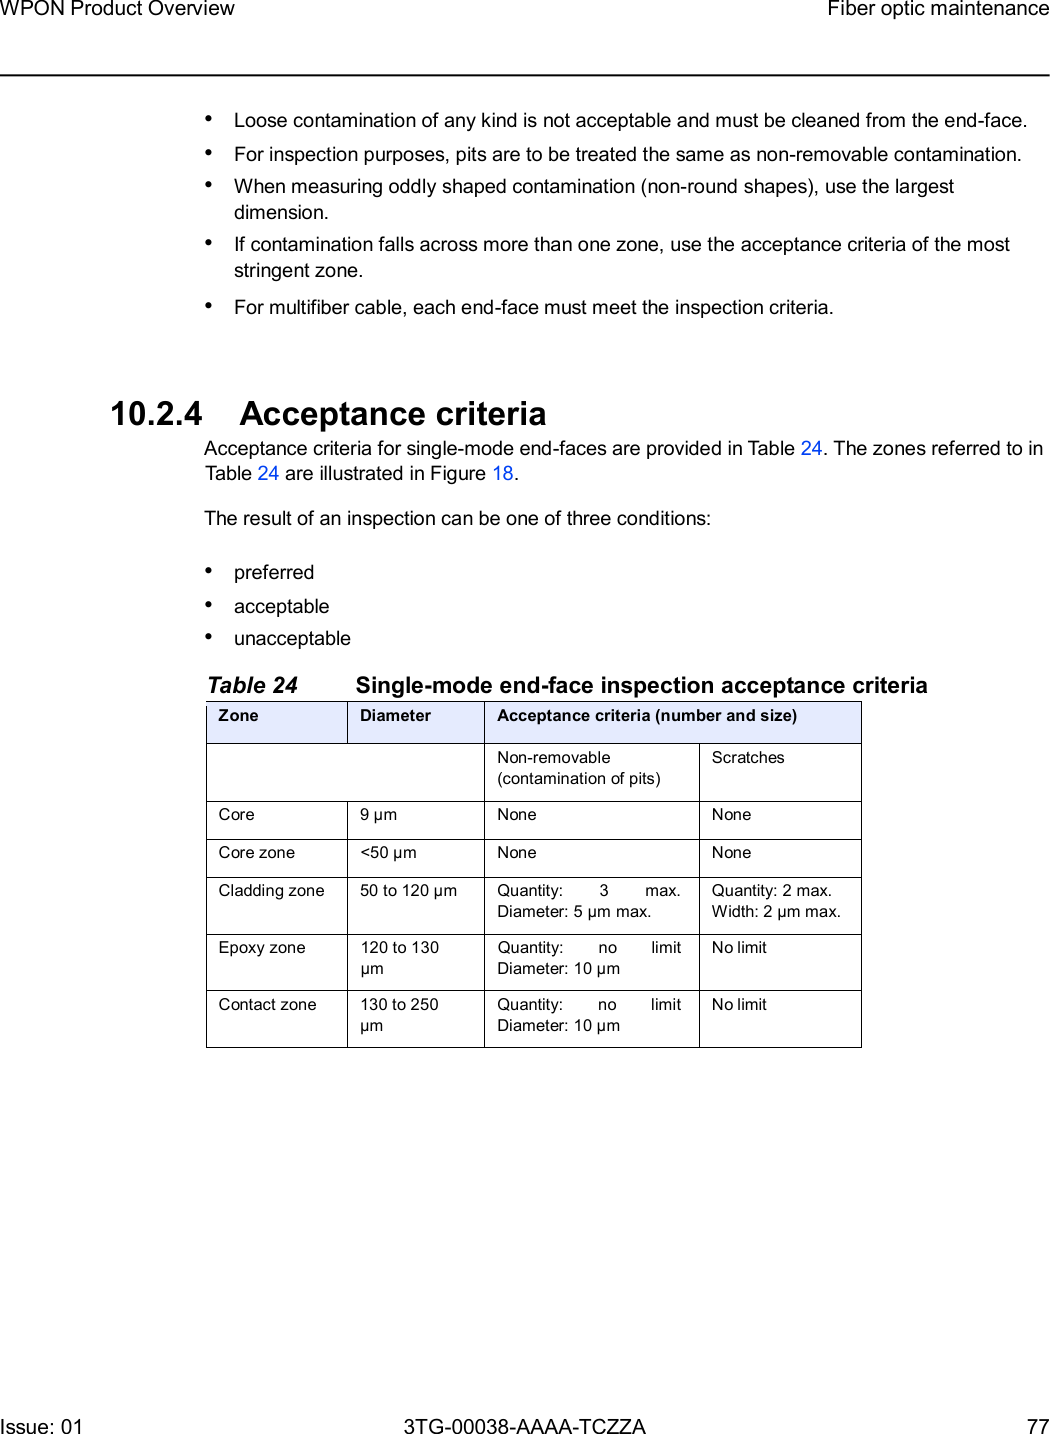 Page 77 of Nokia Bell 7577WPONAPED WPON User Manual WPON Product Overview